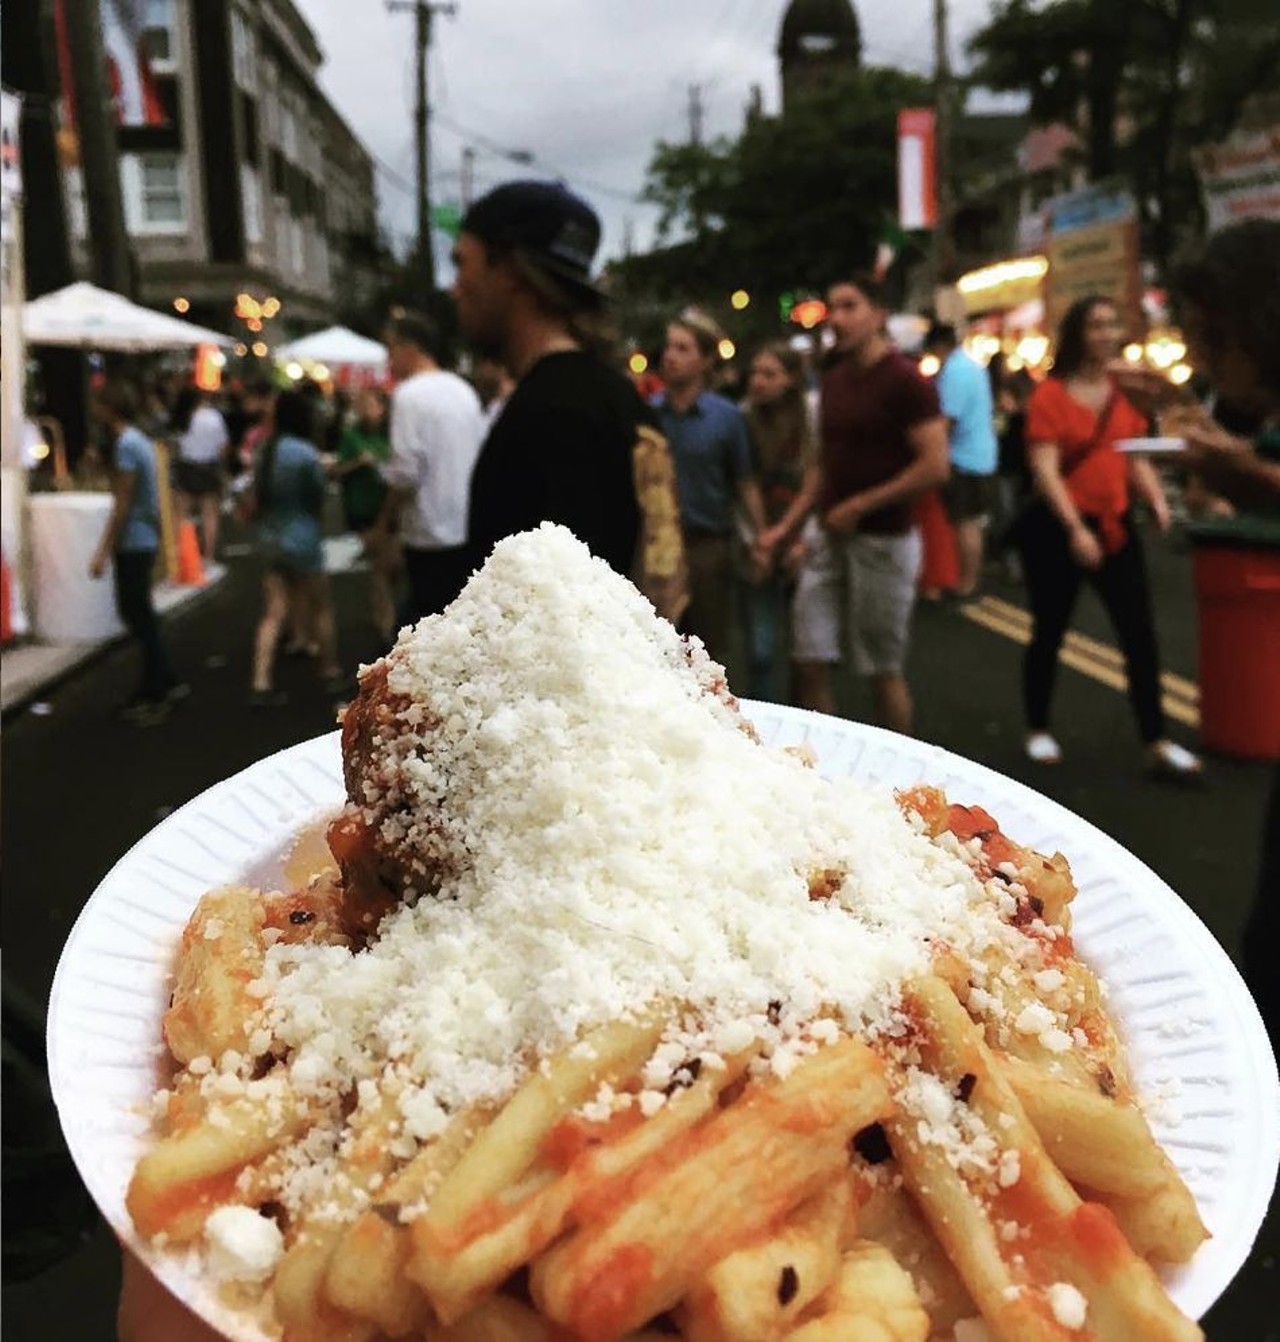 Feast of the Assumption
When: August 12th-15th
Where: Little Italy 
What: Food, Food and More Food, The Assumption Ceremony, Entertainment and More
Photo via Scene Archives